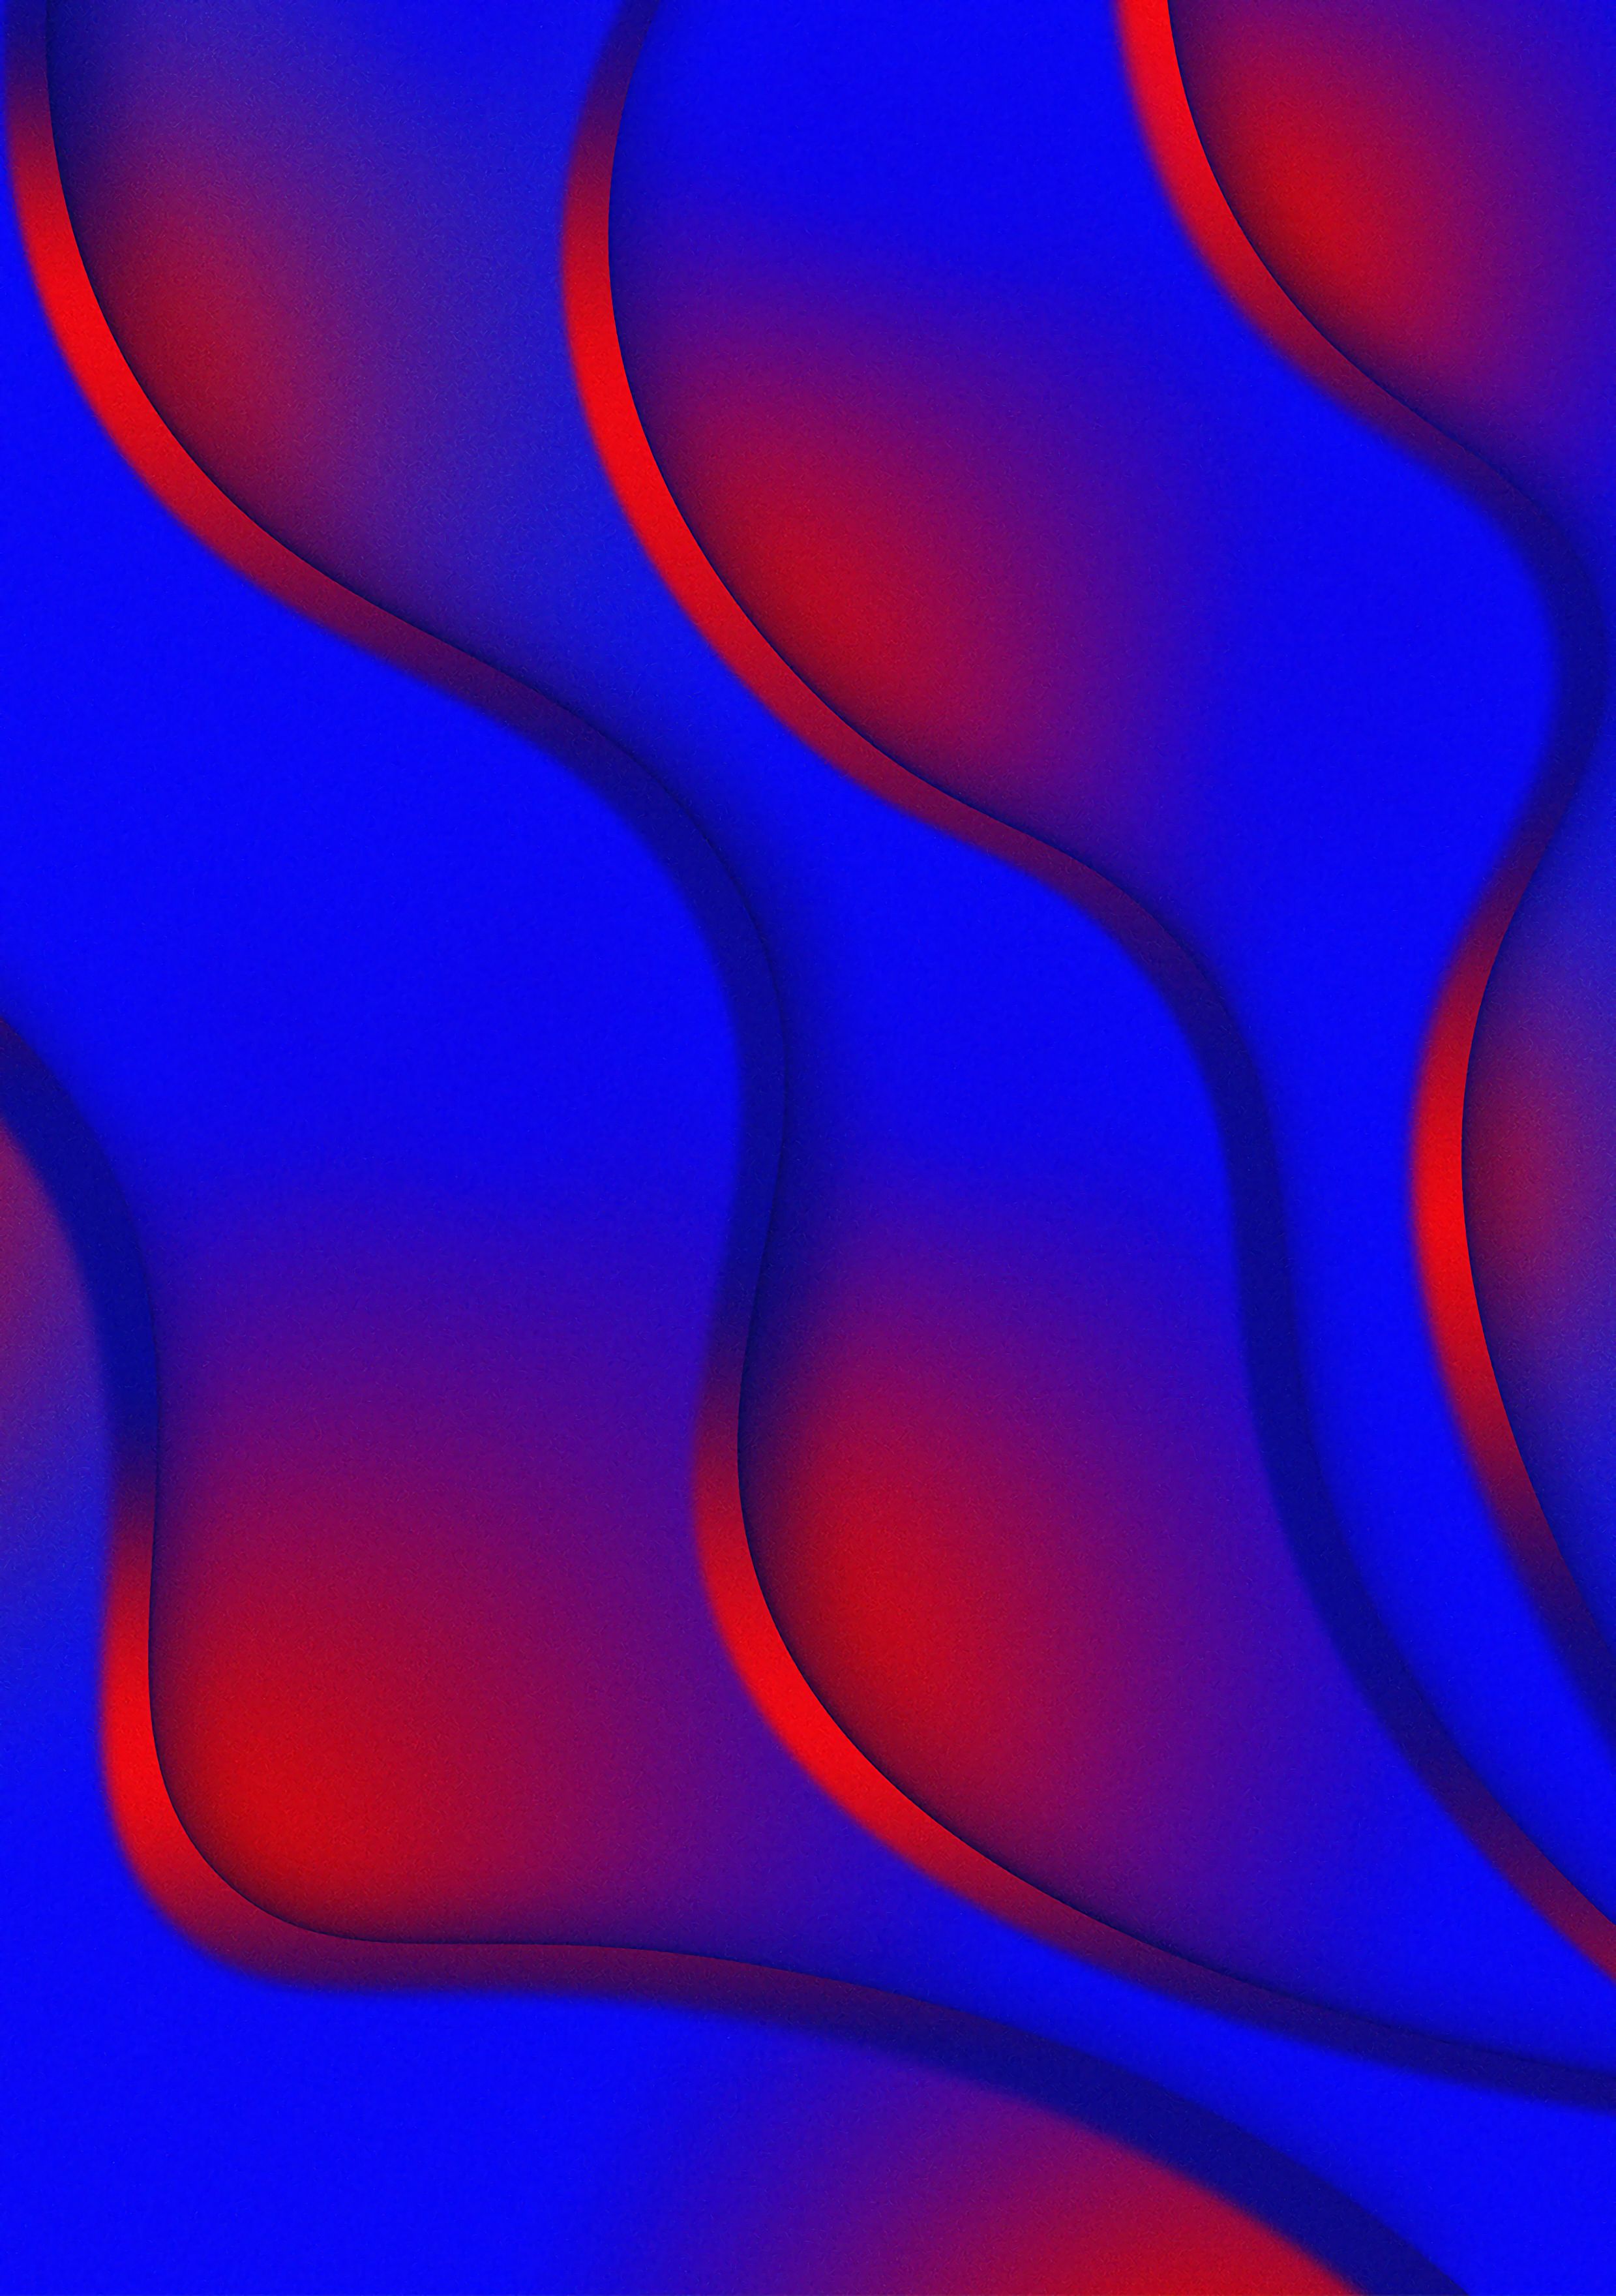 wavy, texture, blue, red, textures, layers, glow